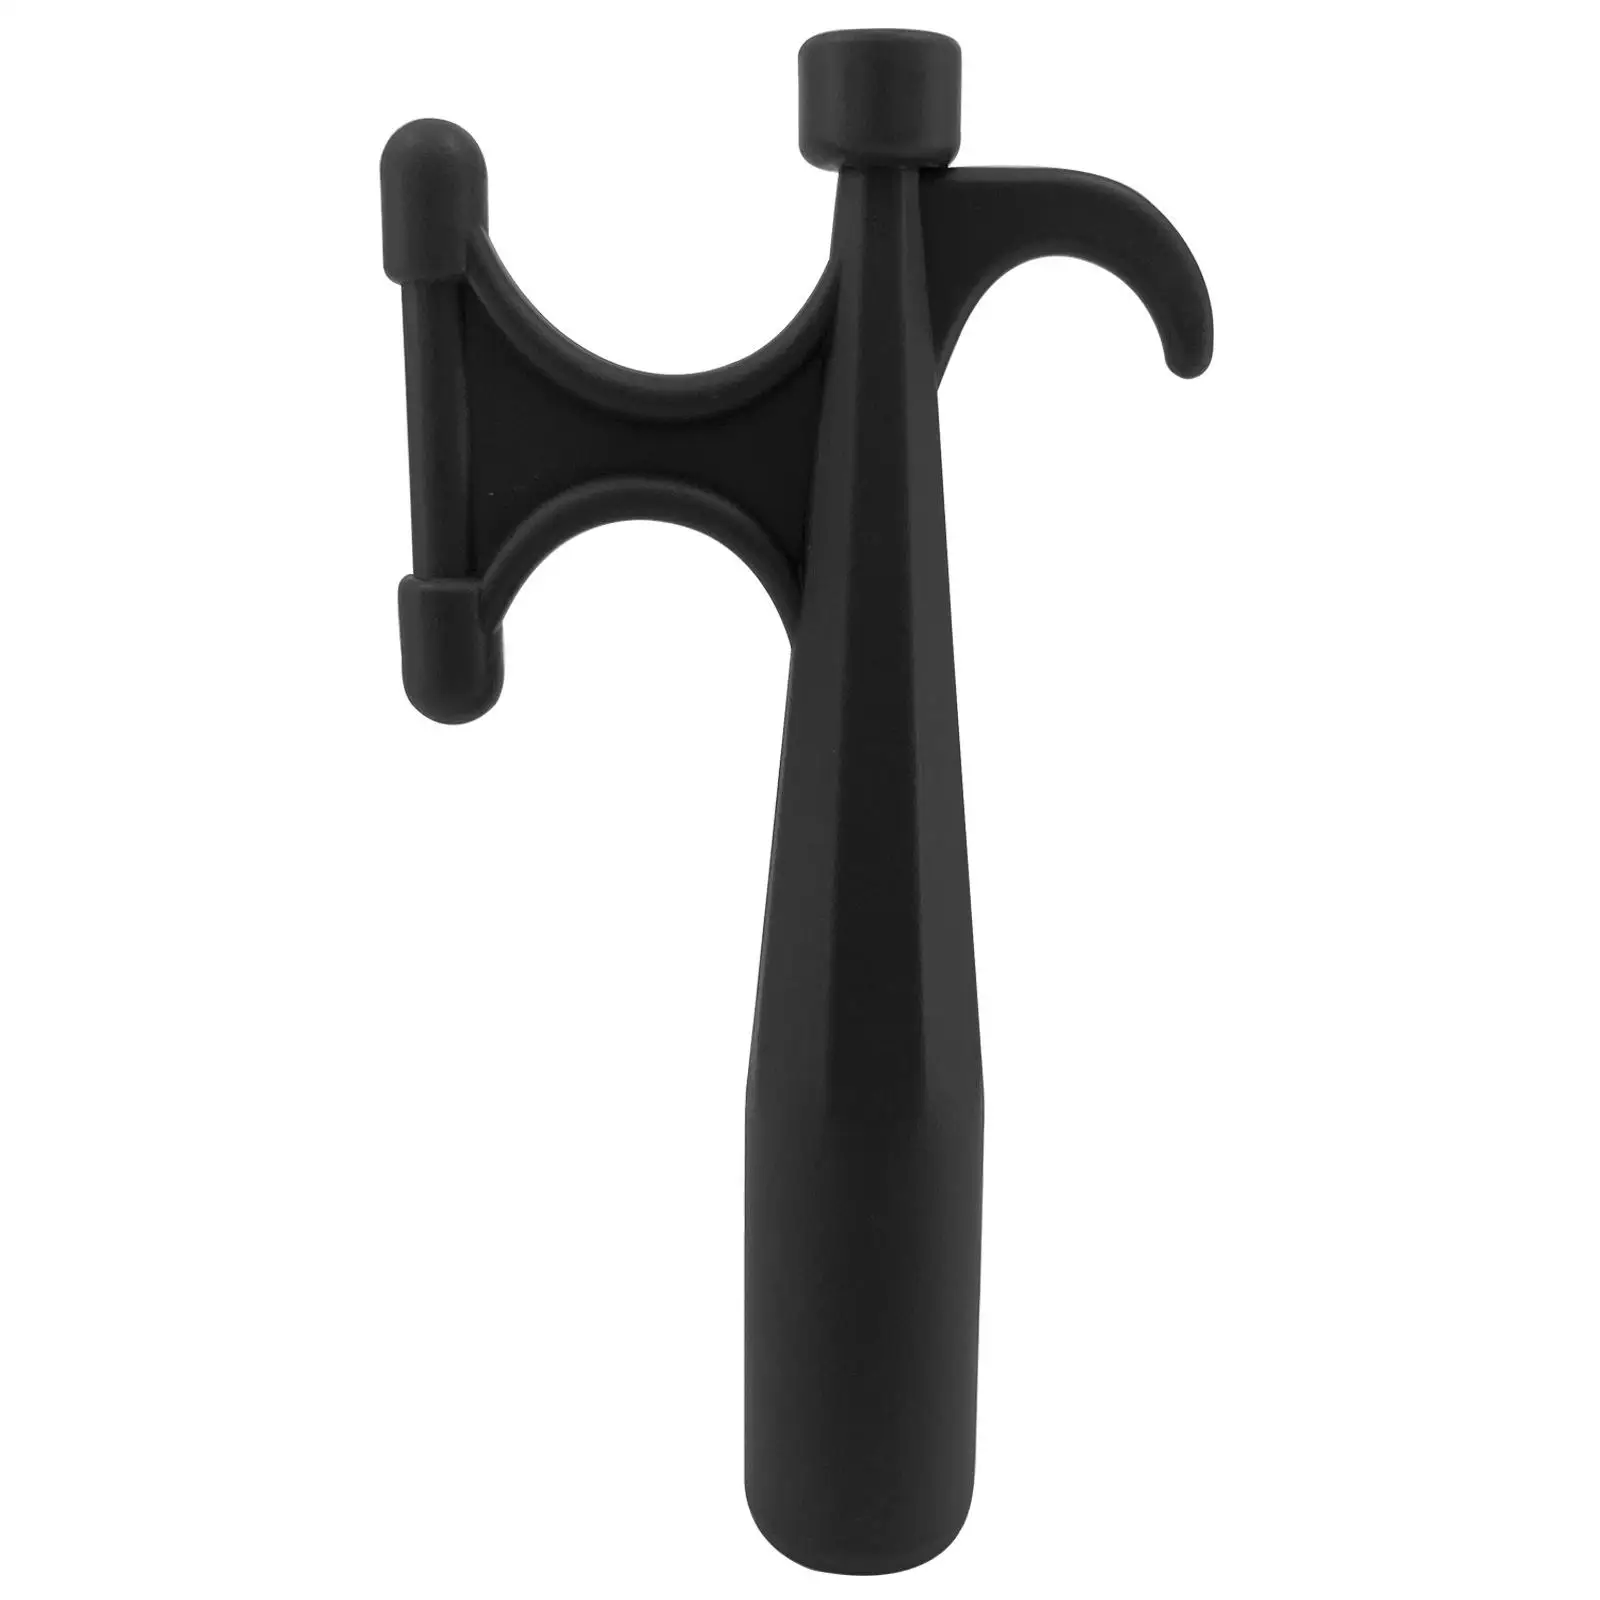 https://ae01.alicdn.com/kf/Sd1b04a5534514b9aa0b12ea2c46e8506e/Boat-Hook-End-Attachment-Unbreakable-Lifeboat-Hook-Boathook-Head-Top-Attachment-for-Kayak-Docking-Mooring-Fishing.jpg